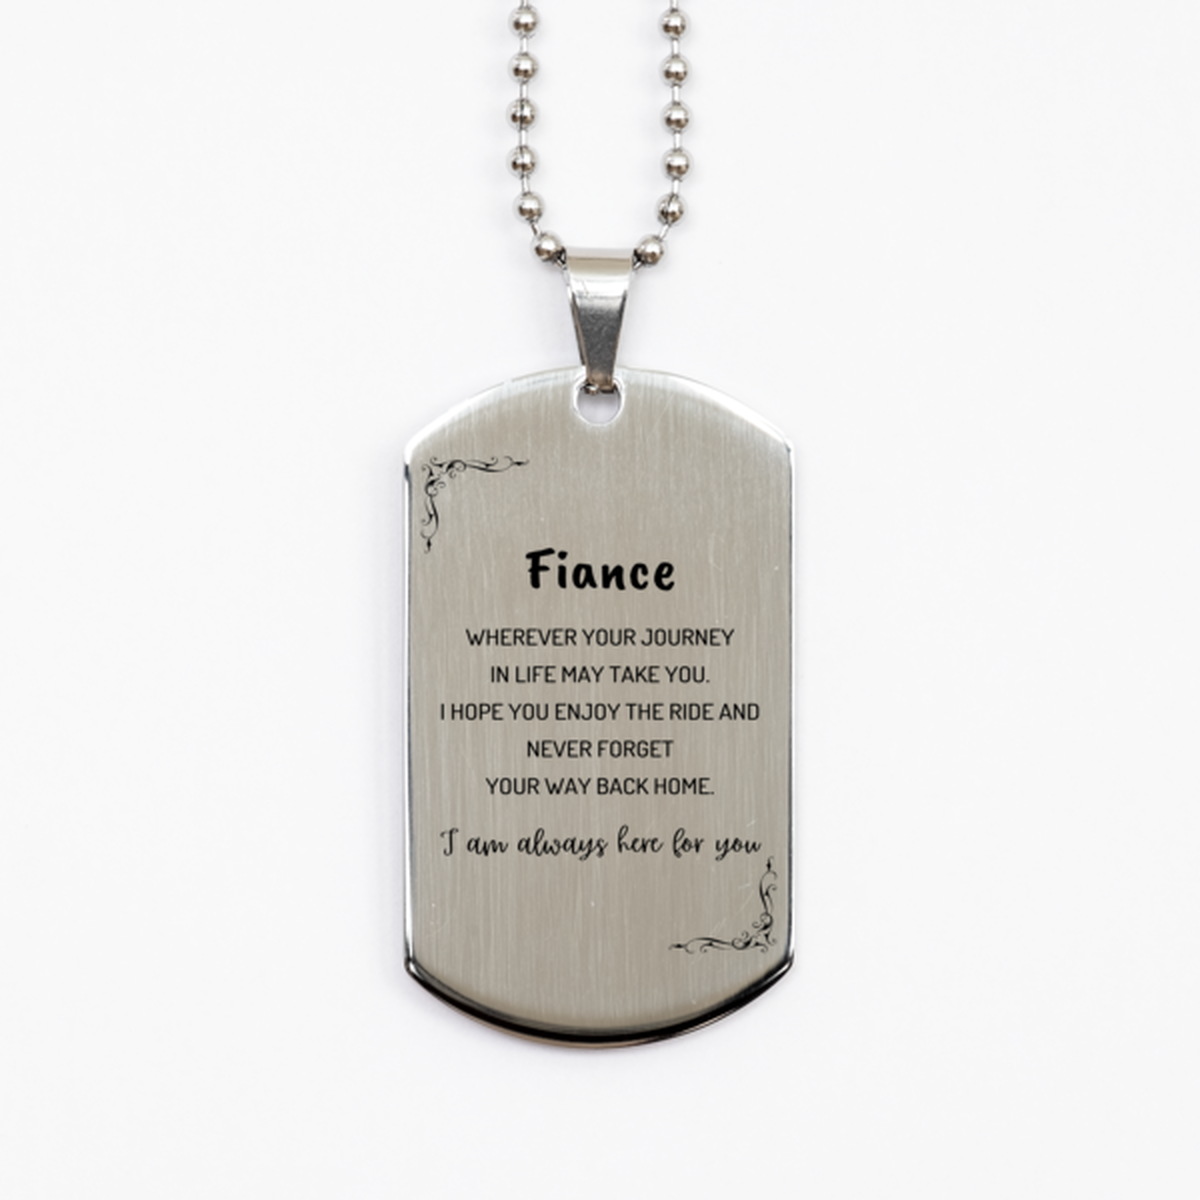 Fiance wherever your journey in life may take you, I am always here for you Fiance Silver Dog Tag, Awesome Christmas Gifts For Fiance, Fiance Birthday Gifts for Men Women Family Loved One